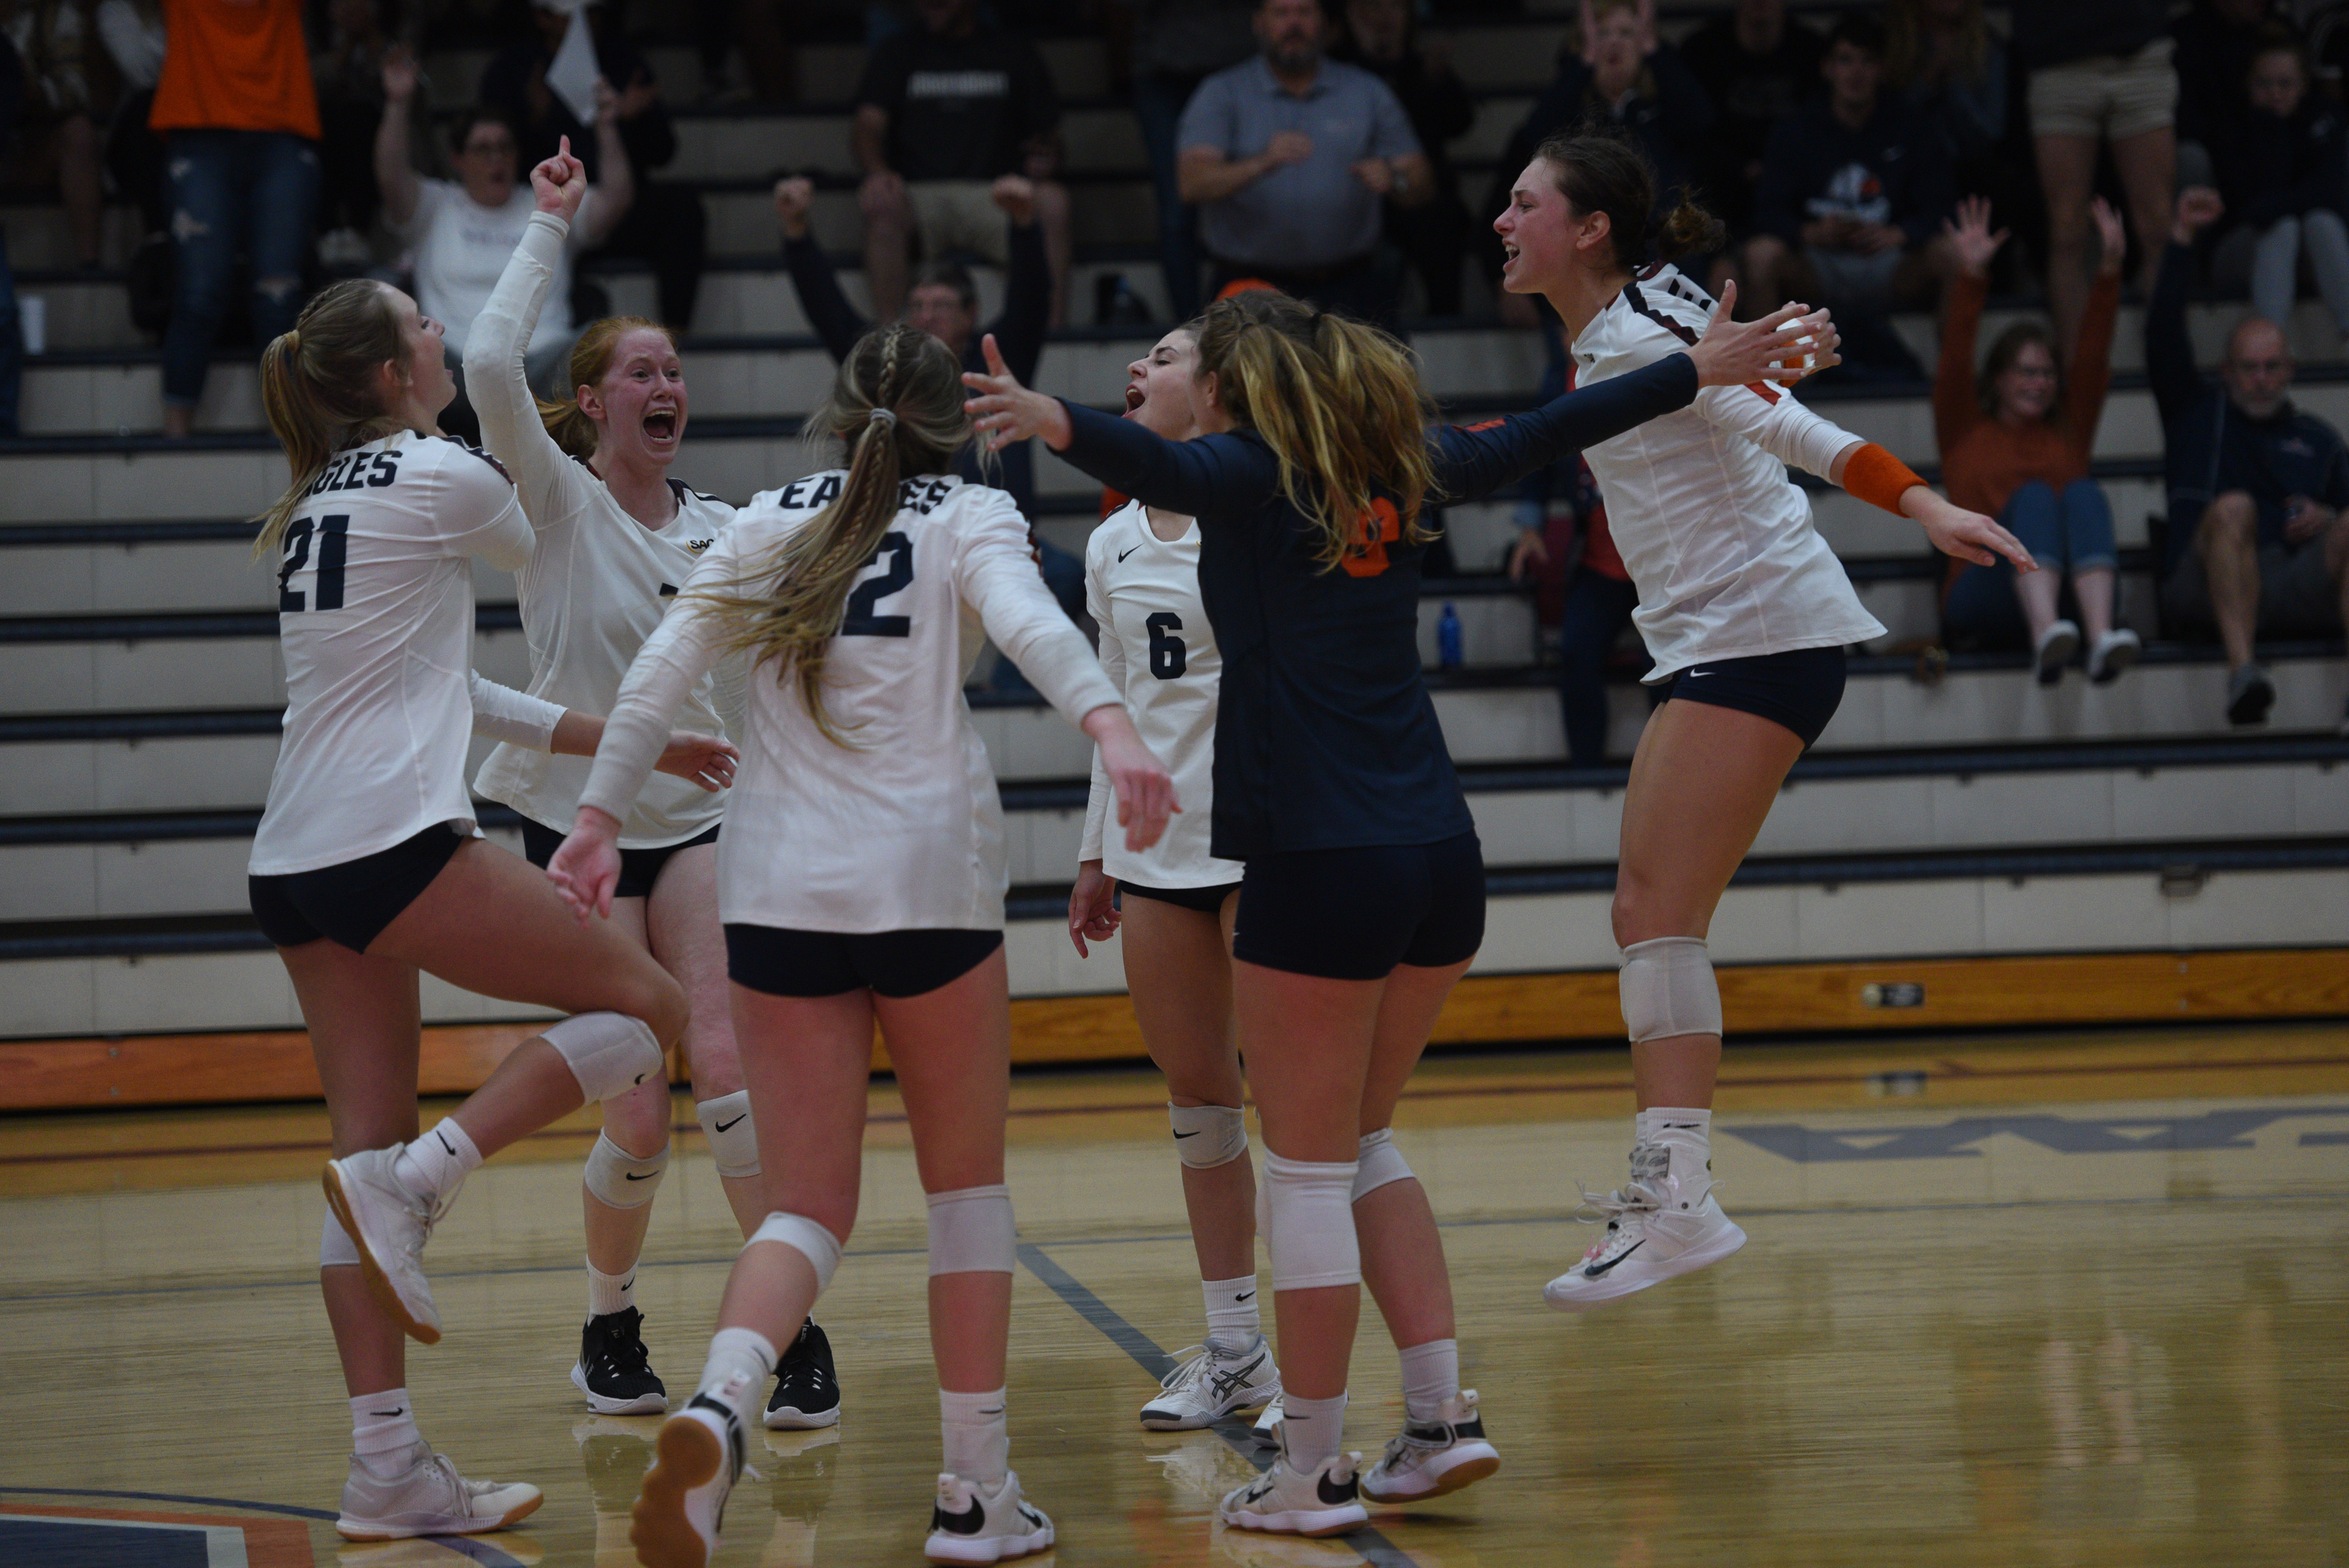 Relentless Eagles power past Bears in straight sets